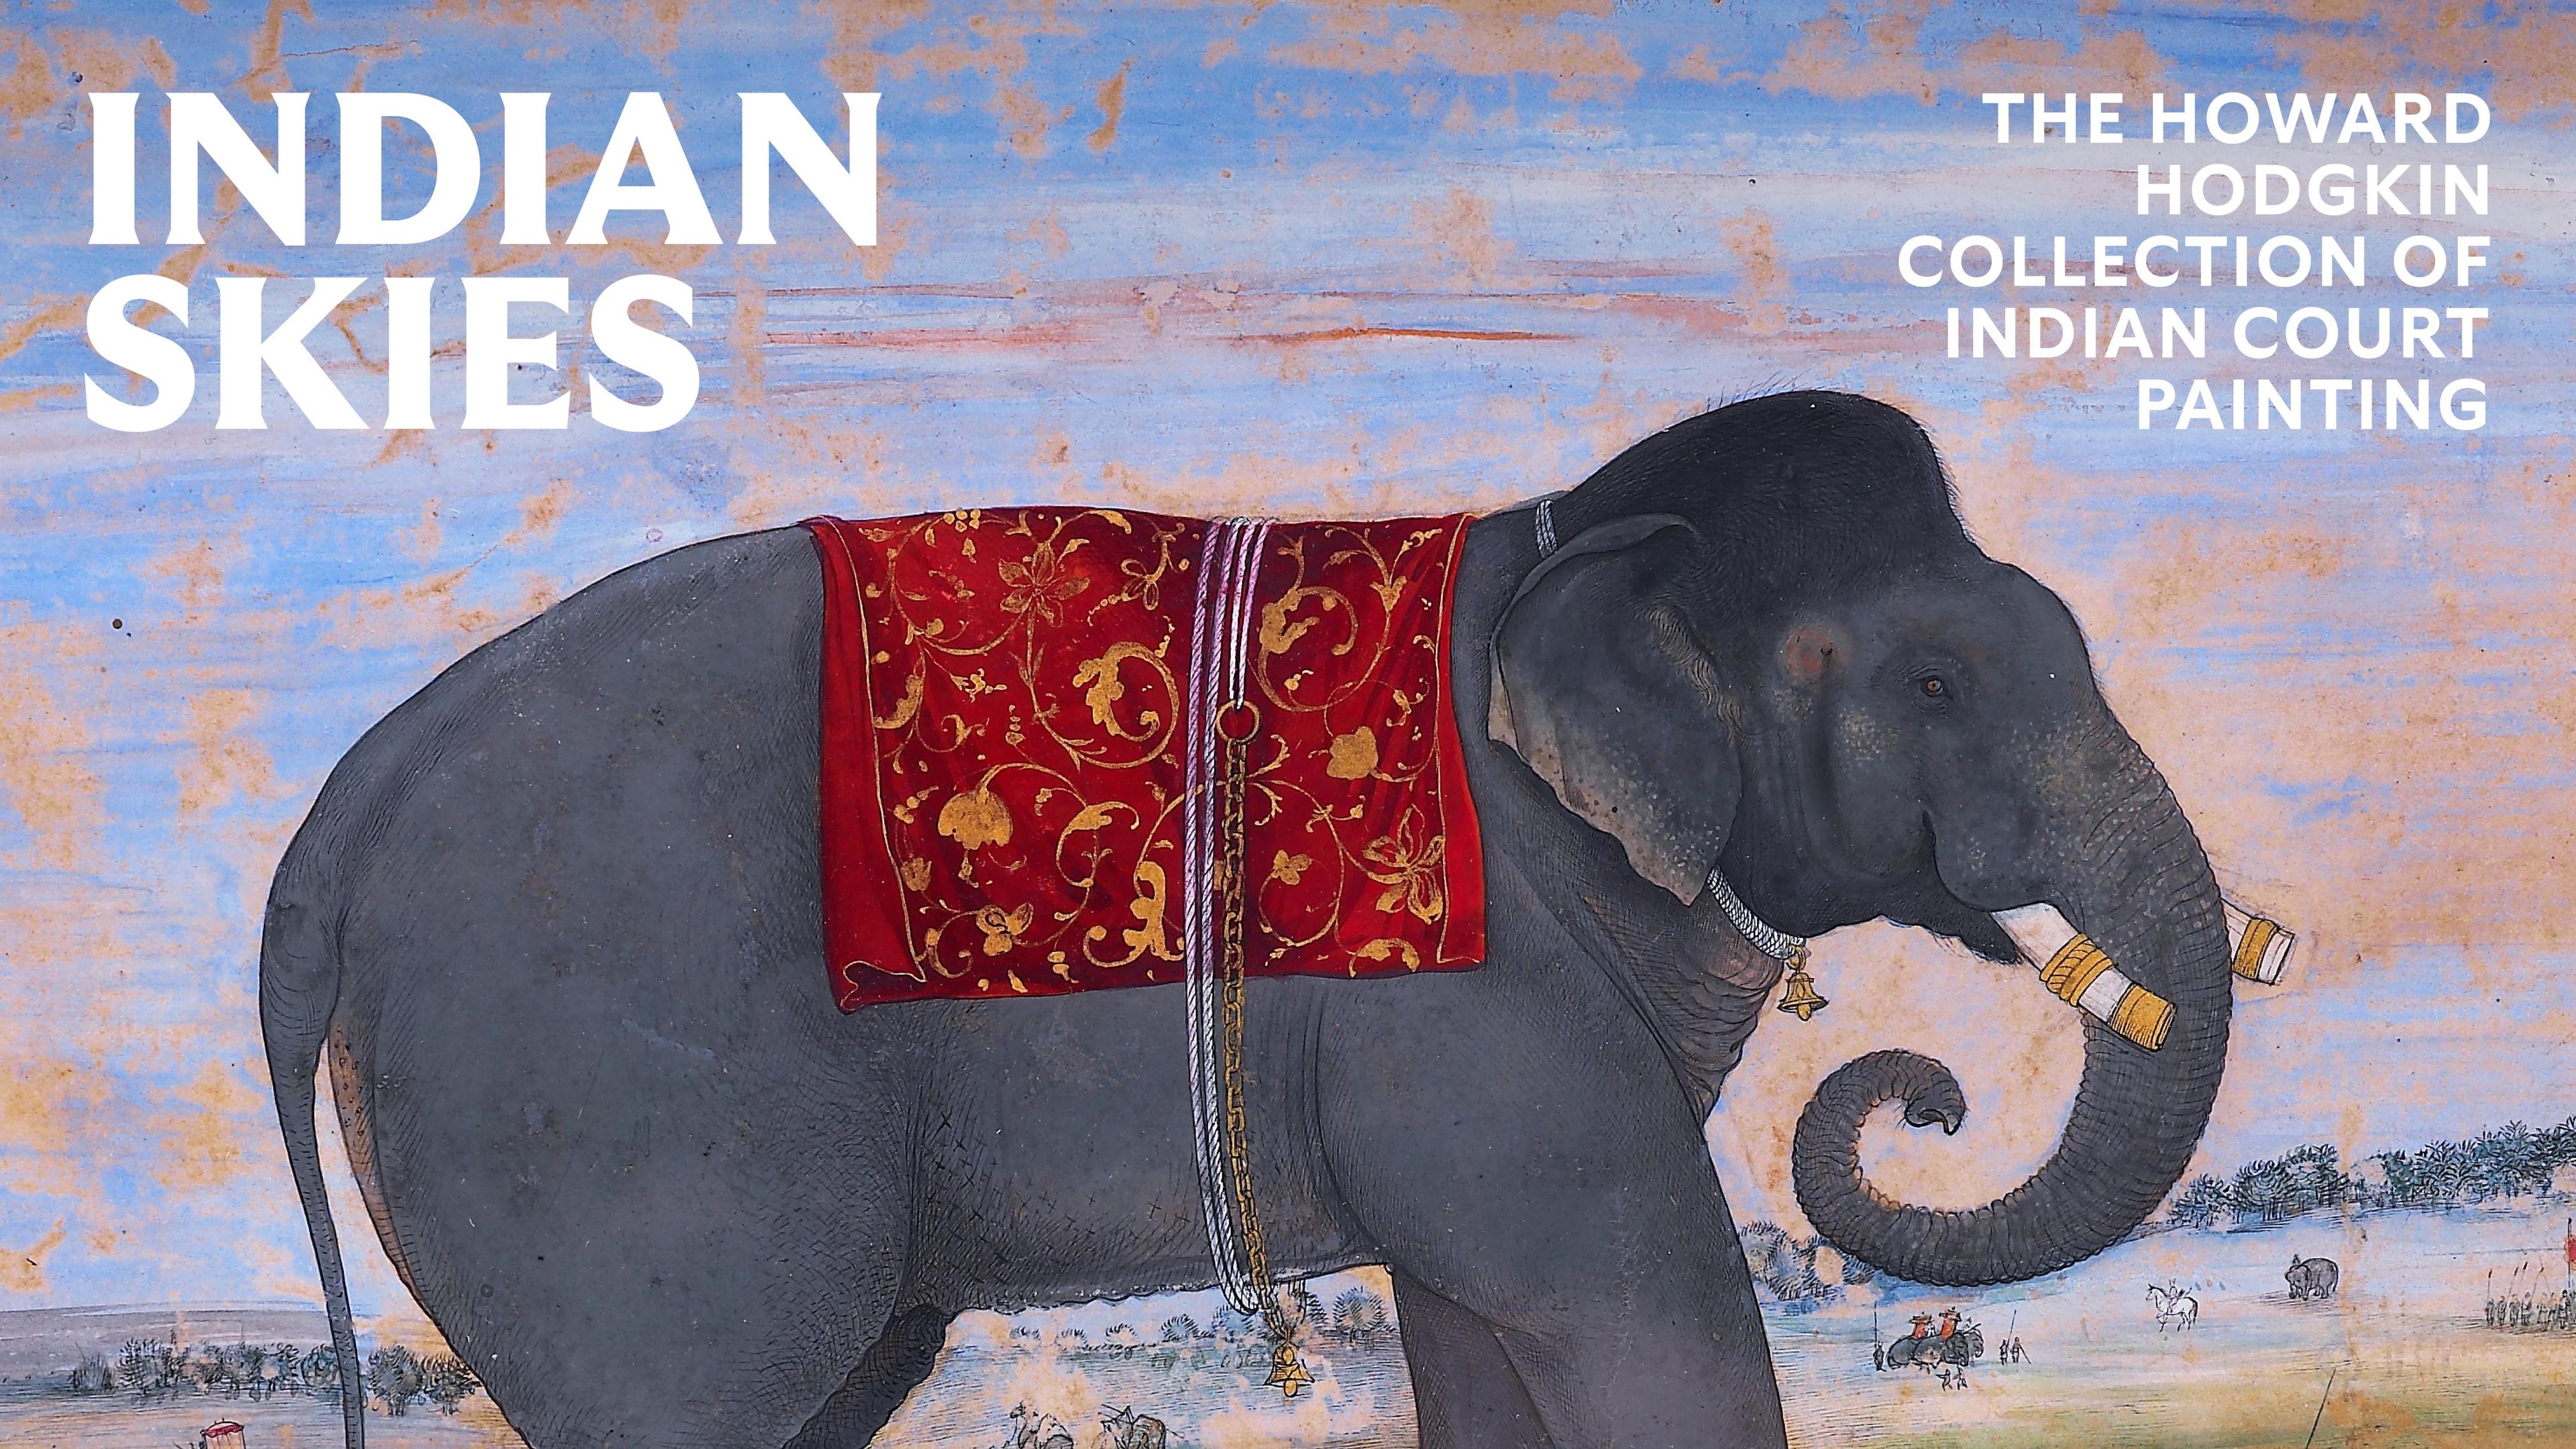 Large elephant print with text reading Indian Skies with a sherbet color paint strokes